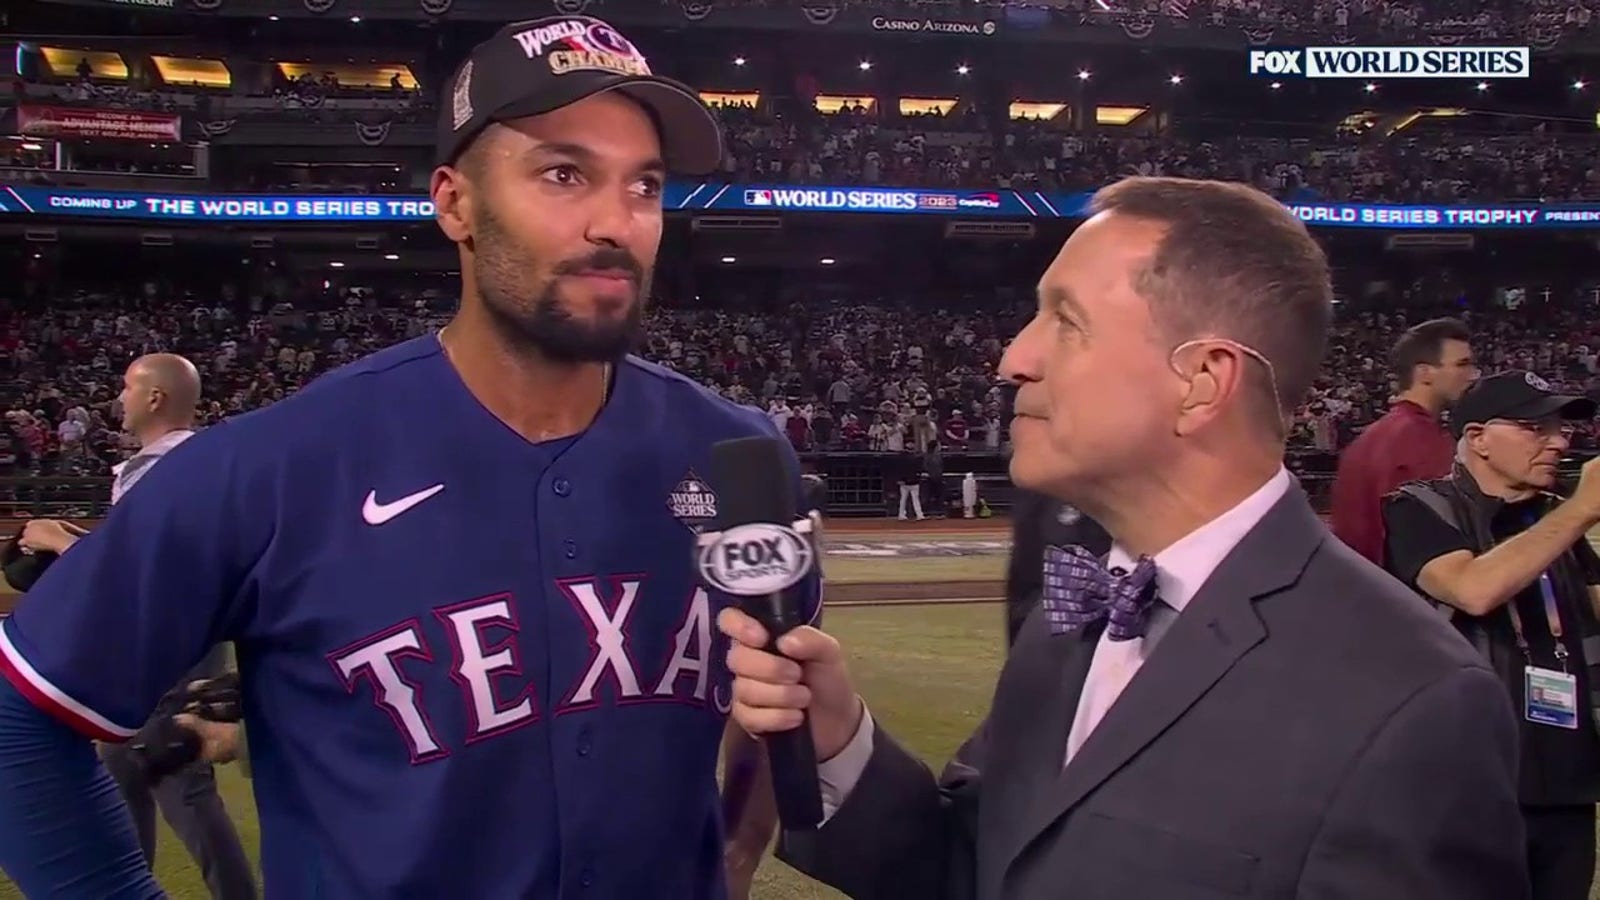 'This is the biggest moment' – Marcus Semien reflects on his home run in the Rangers' first World Series win